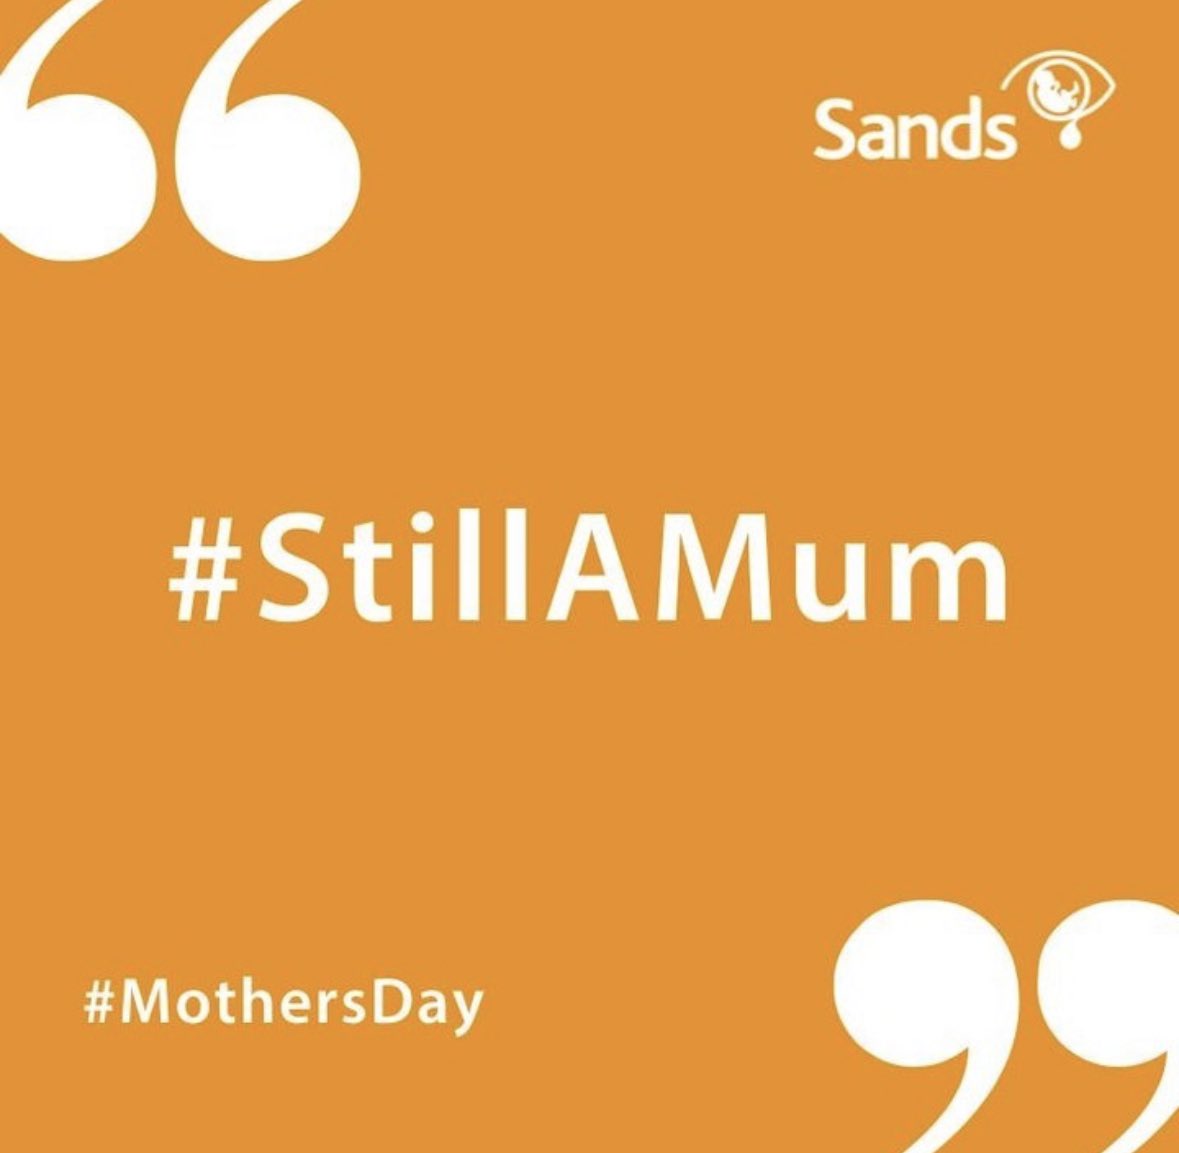 We know #MothersDay2023 will be here soon which will be a huge challenge for many bereaved mothers. @SandsUK are there for you. 🧡 #youarenotalone #stillamum